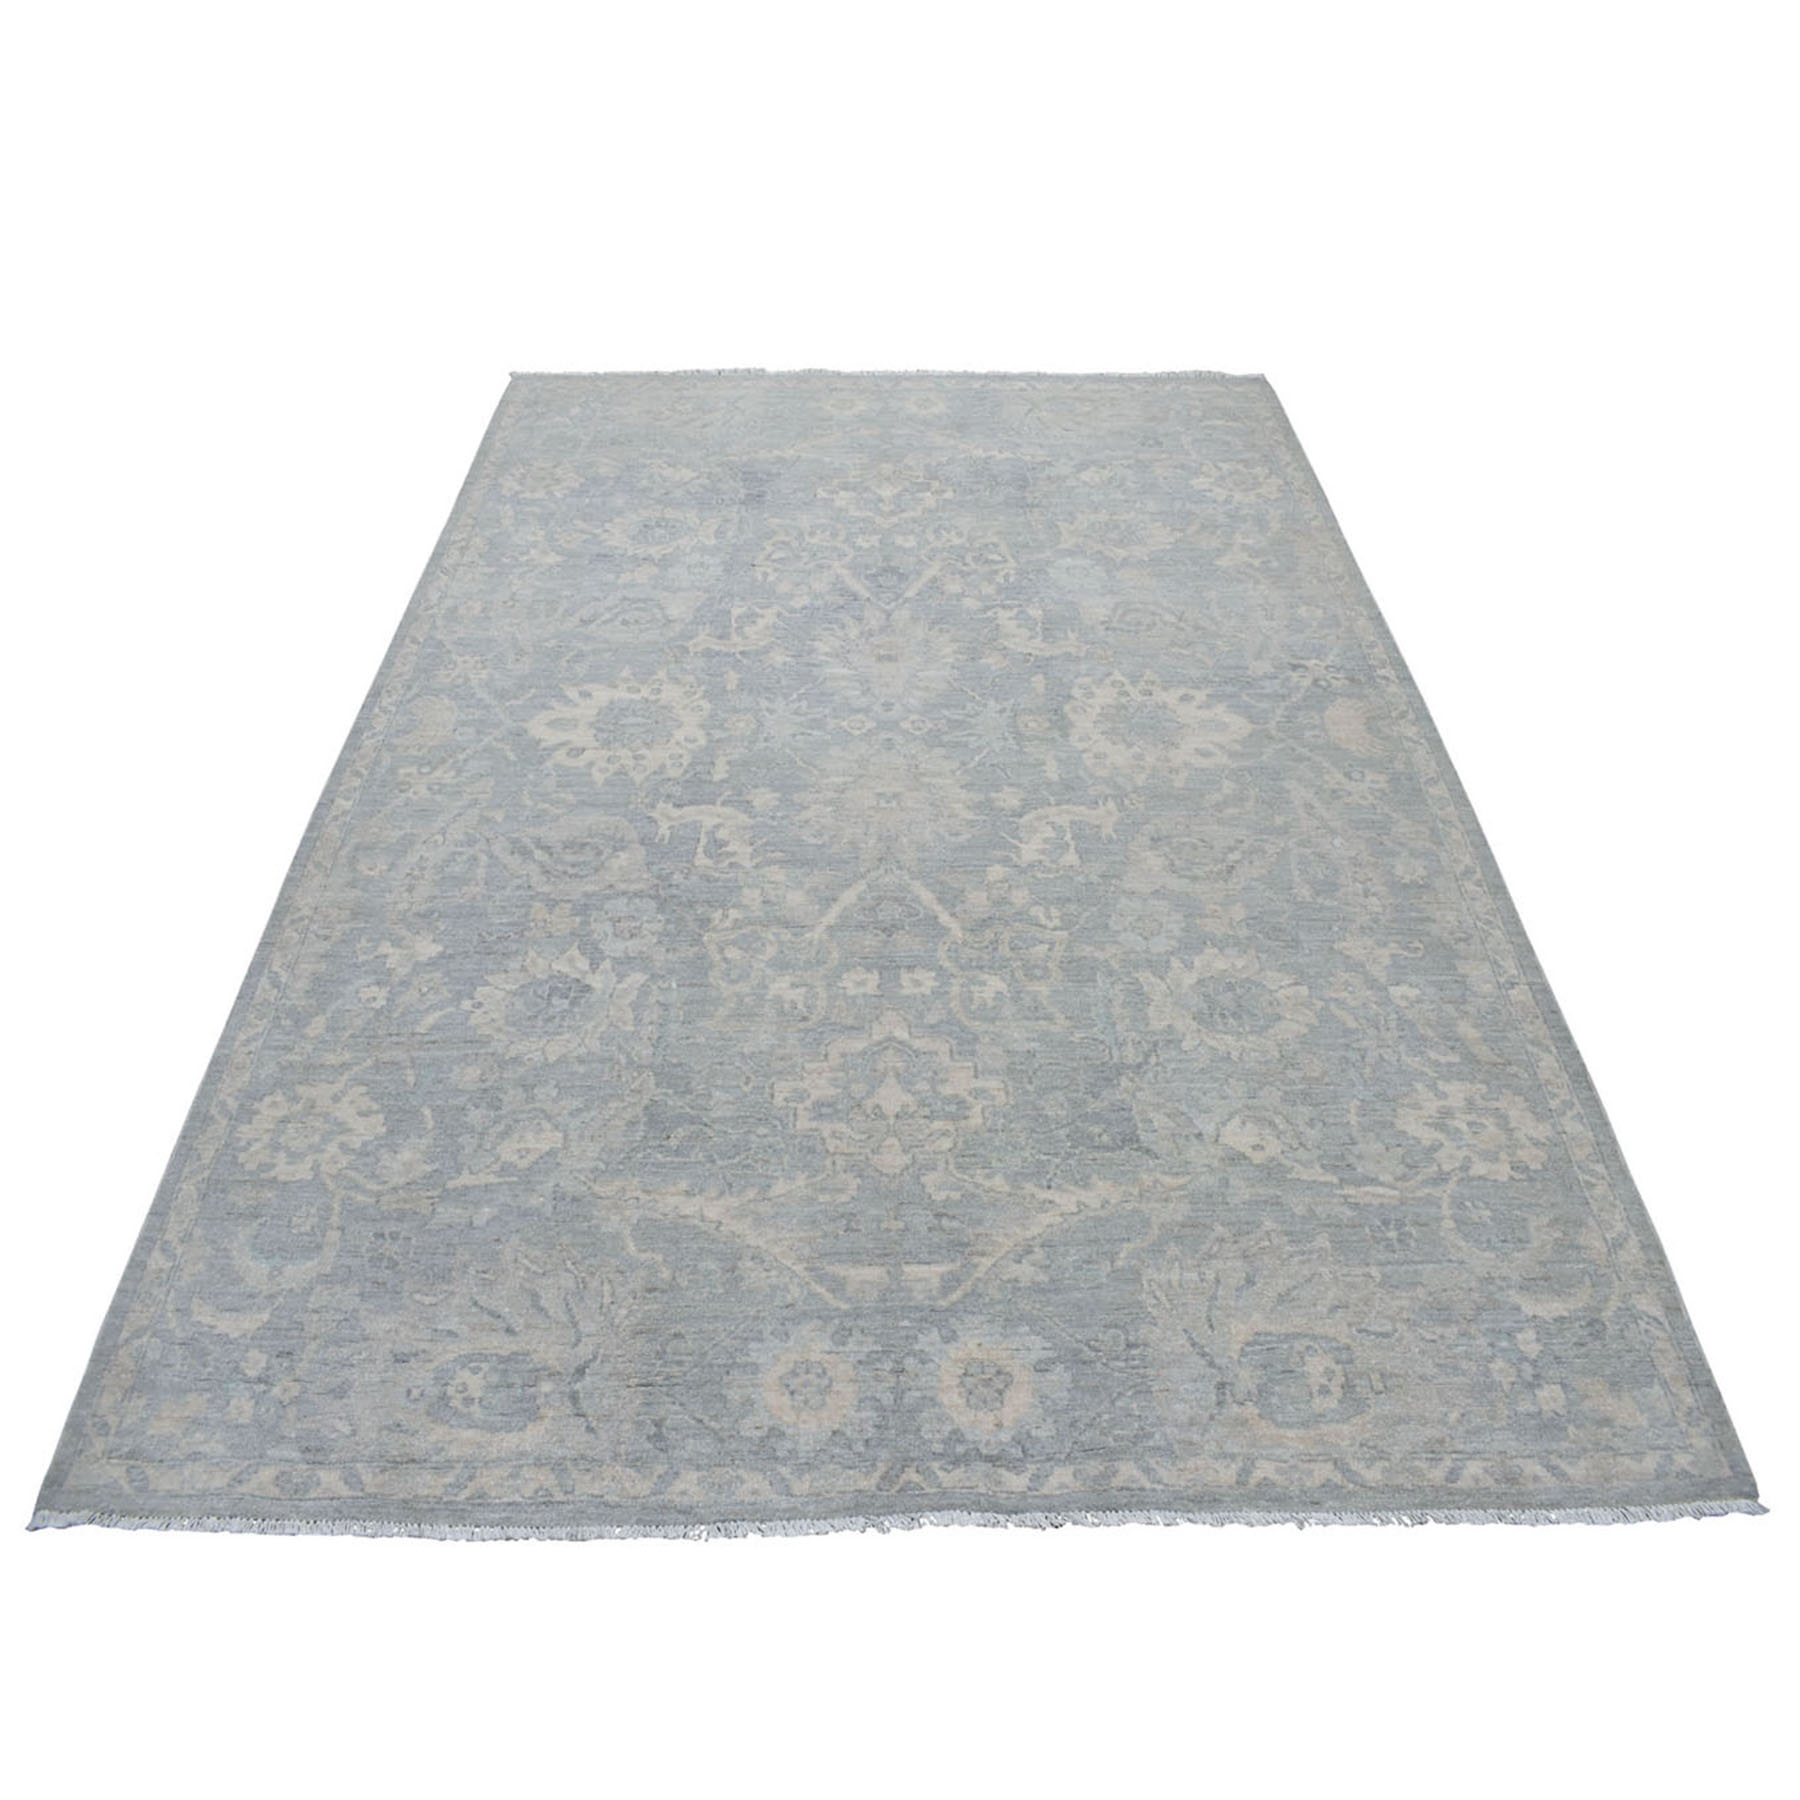 5'10"X8'4" White Wash Peshawar Mahal Design Pure Wool Hand Knotted Oriental Rug moaec9ed